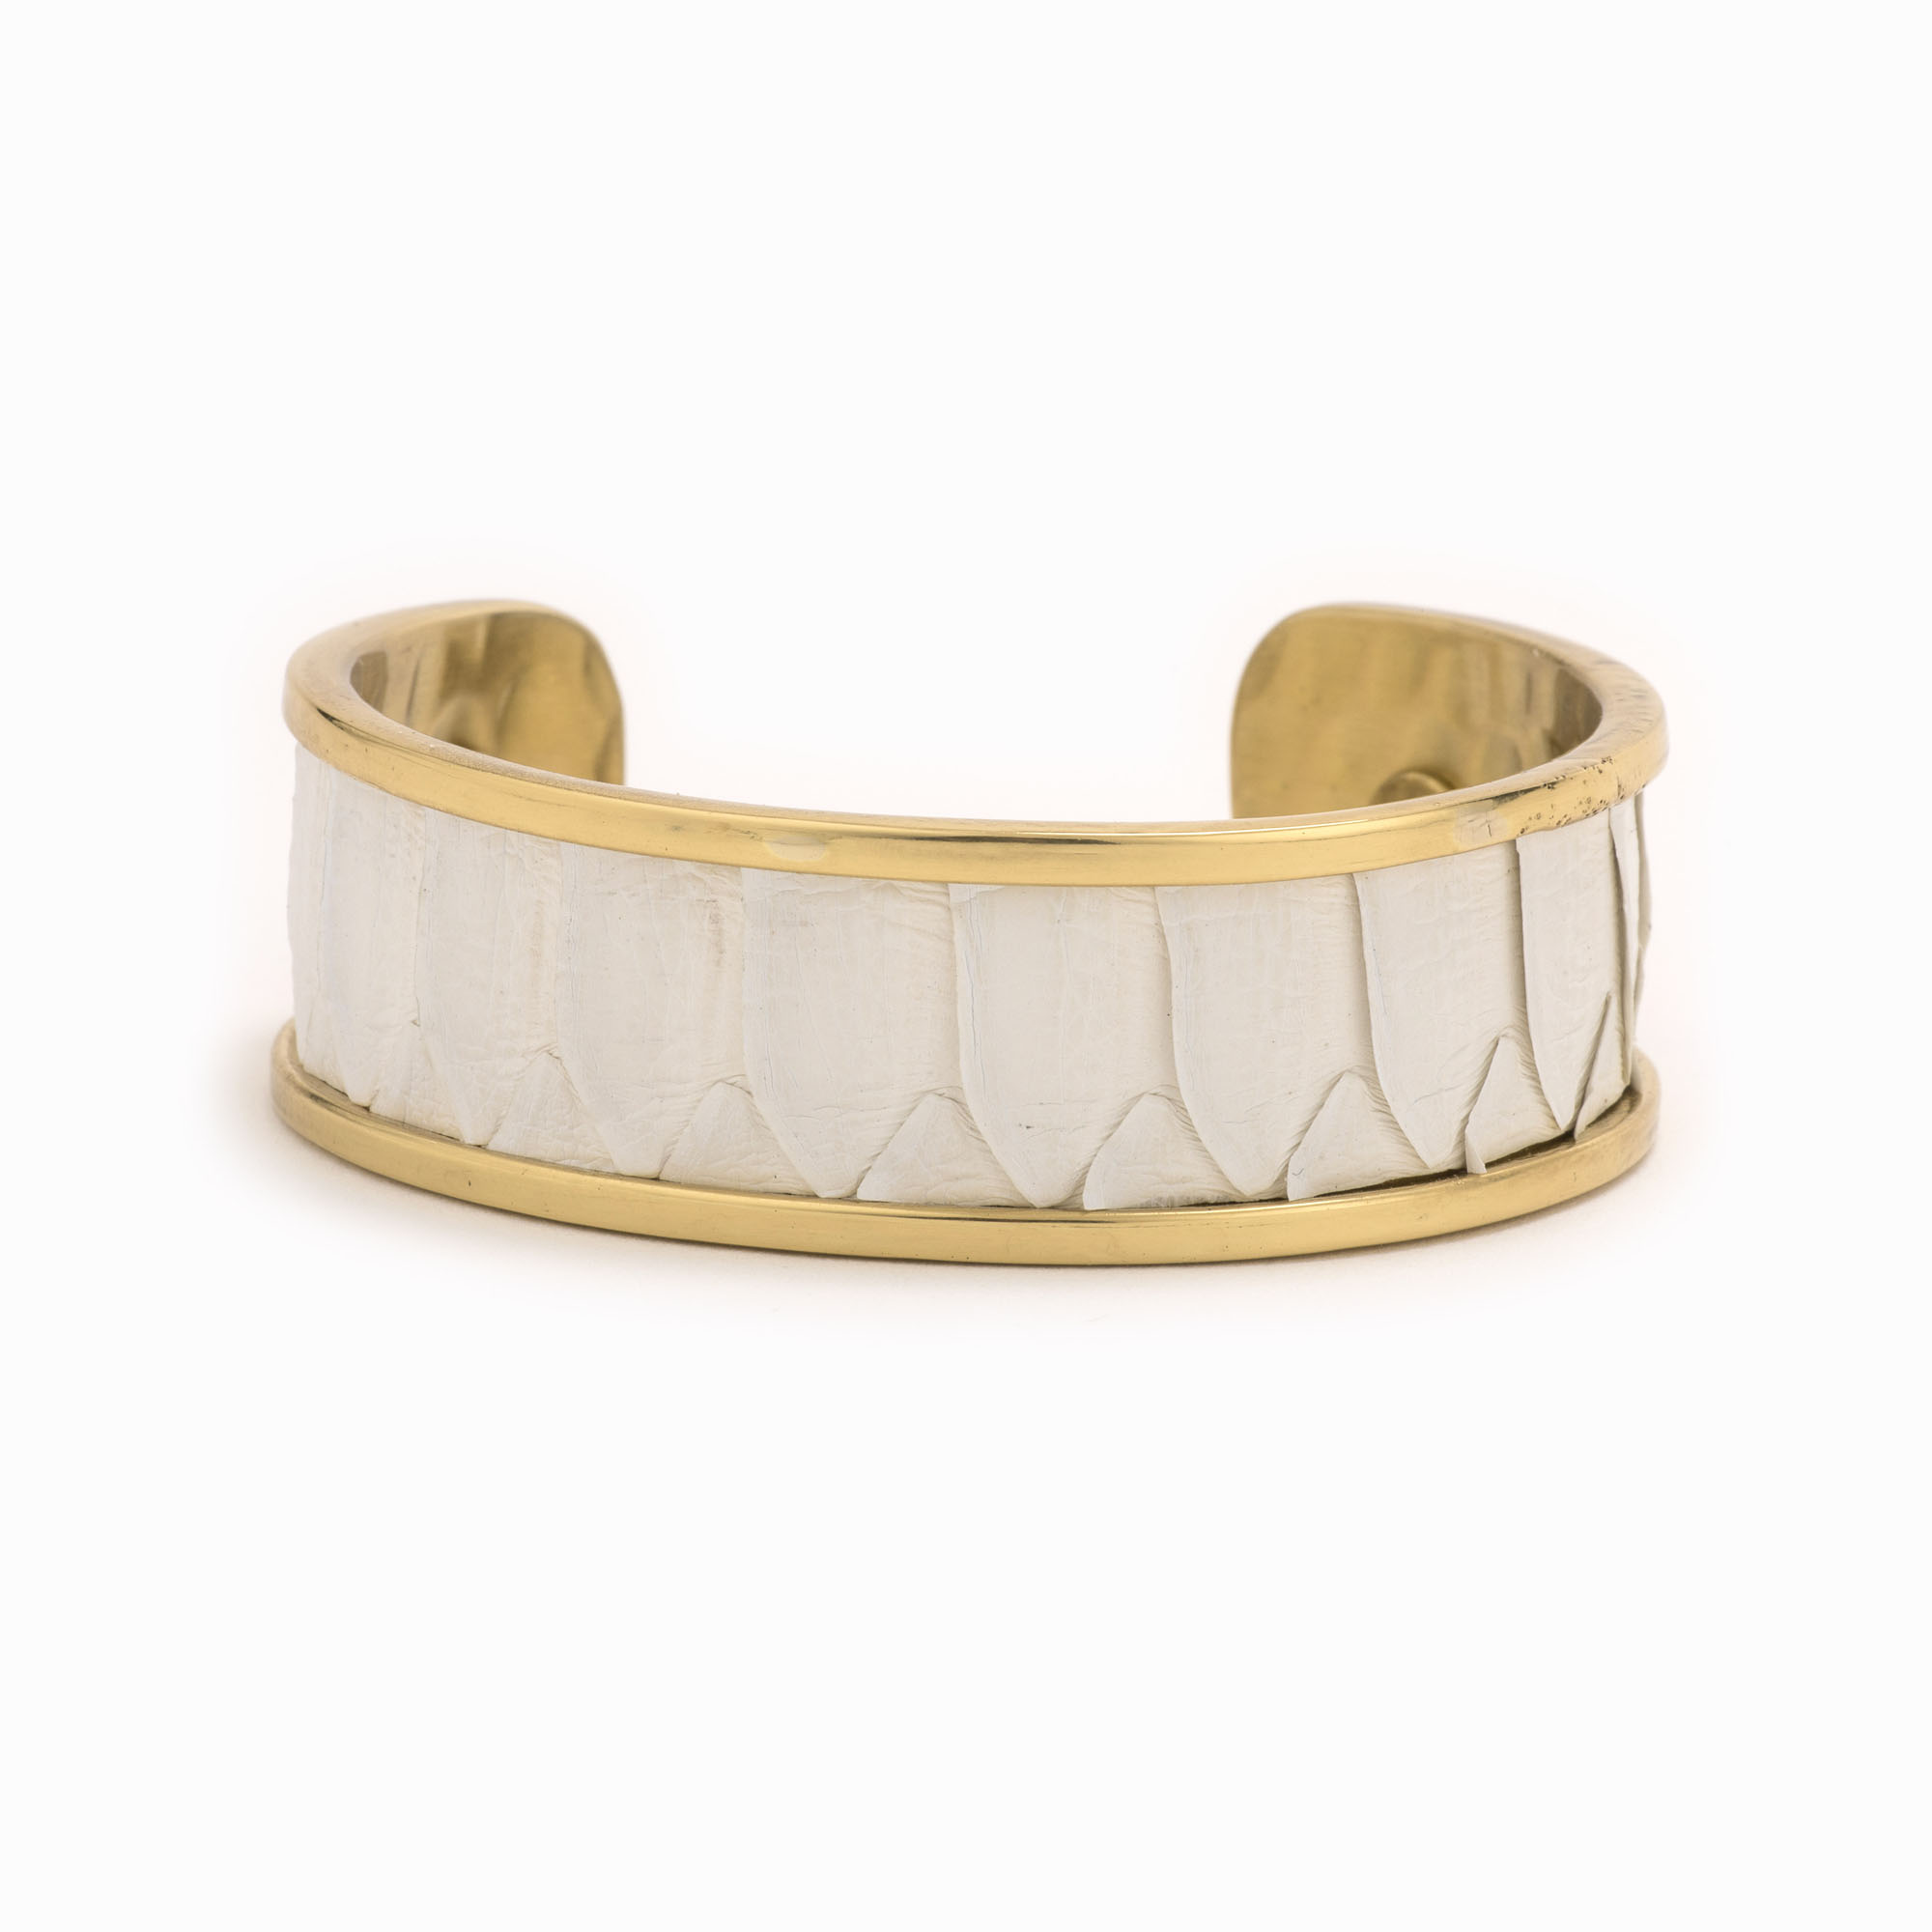 A medium gold cuff with white colored snakeskin pattern inlaid.